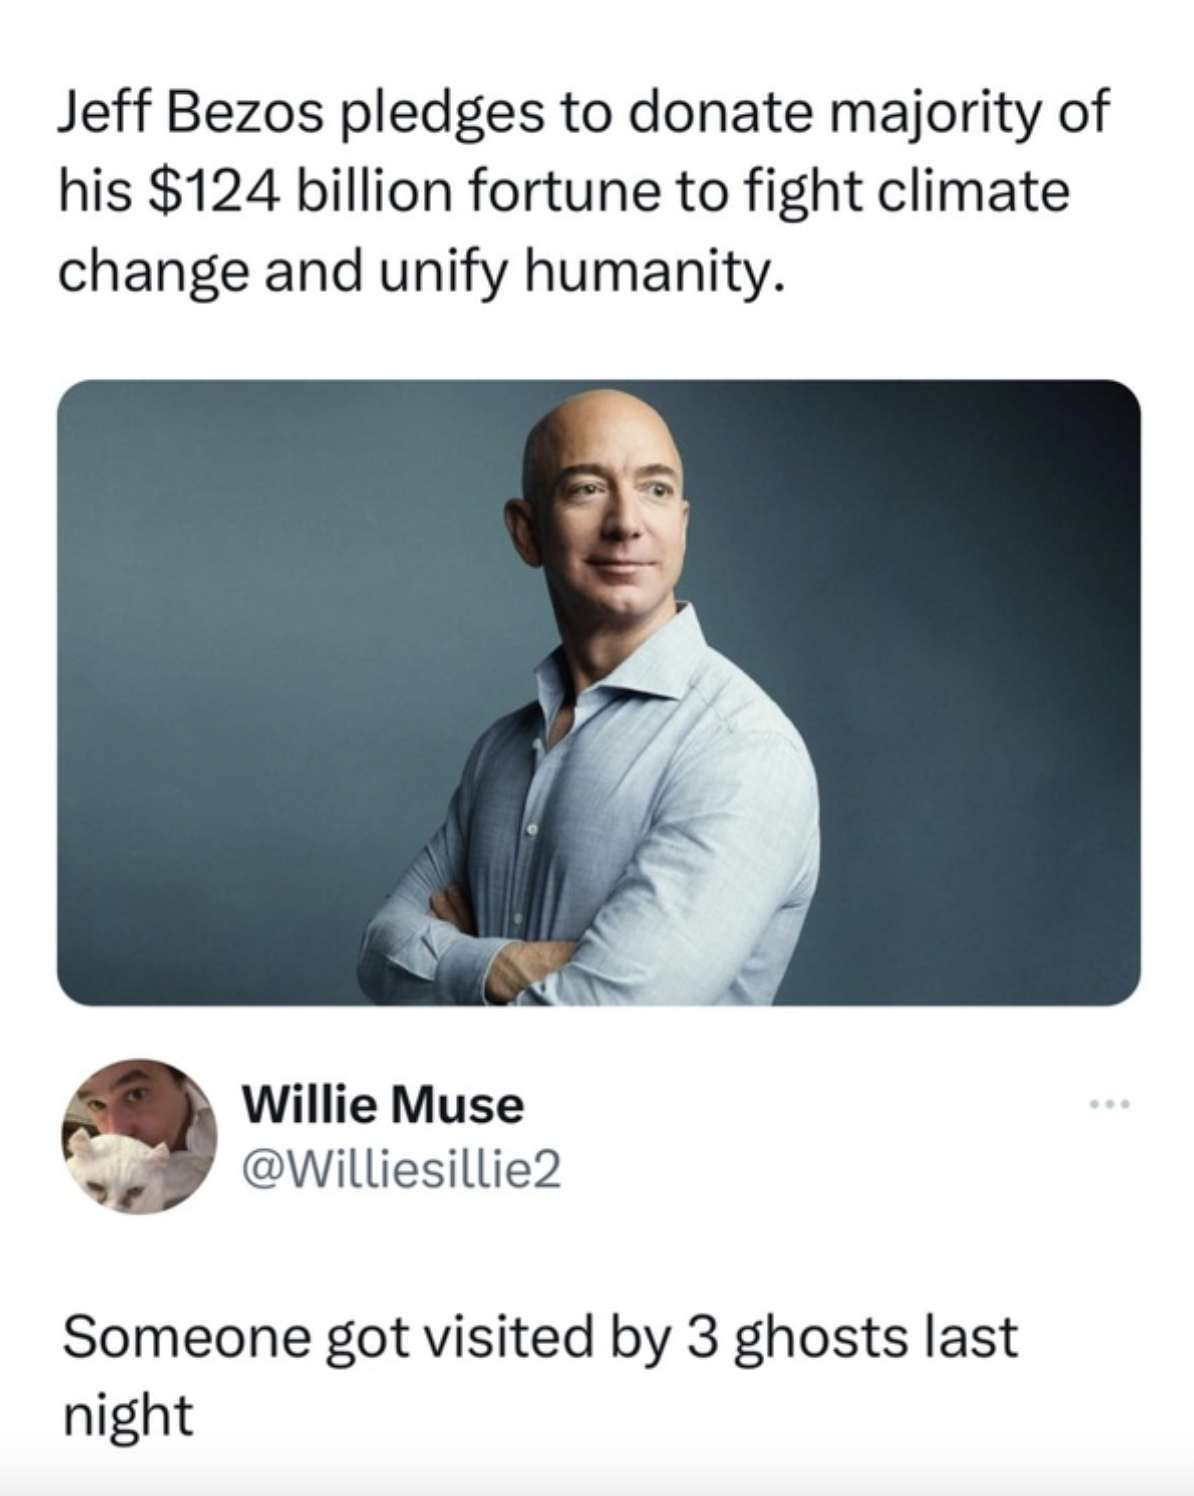 jeff bezos 3 ghosts - Jeff Bezos pledges to donate majority of his $124 billion fortune to fight climate change and unify humanity. Willie Muse Someone got visited by 3 ghosts last night